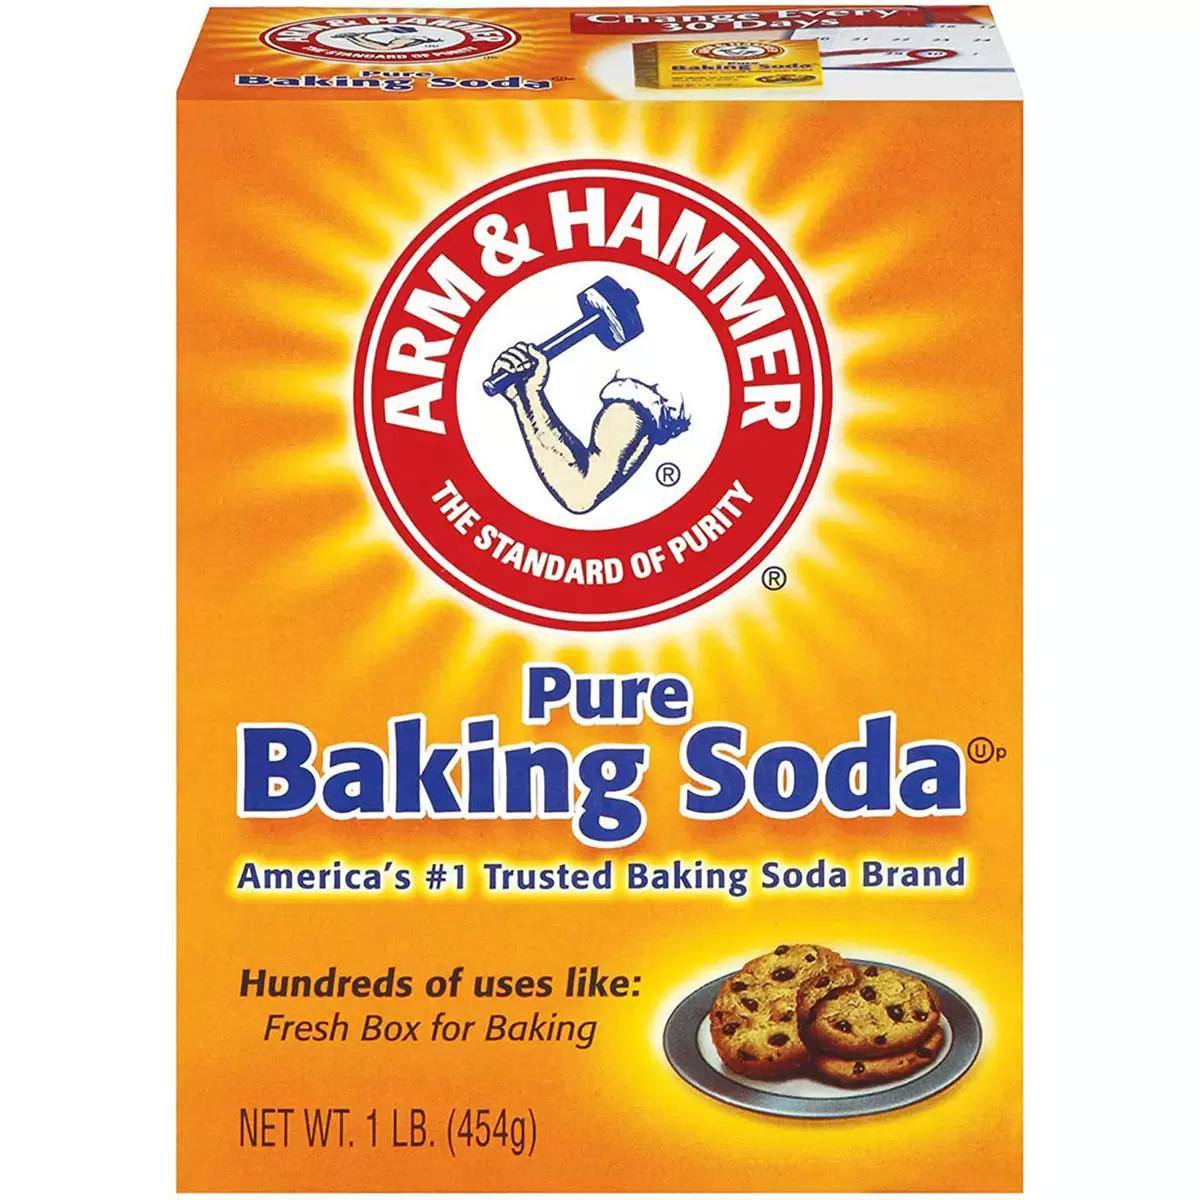 1Lb Arm and Hammer Baking Soda for $0.78